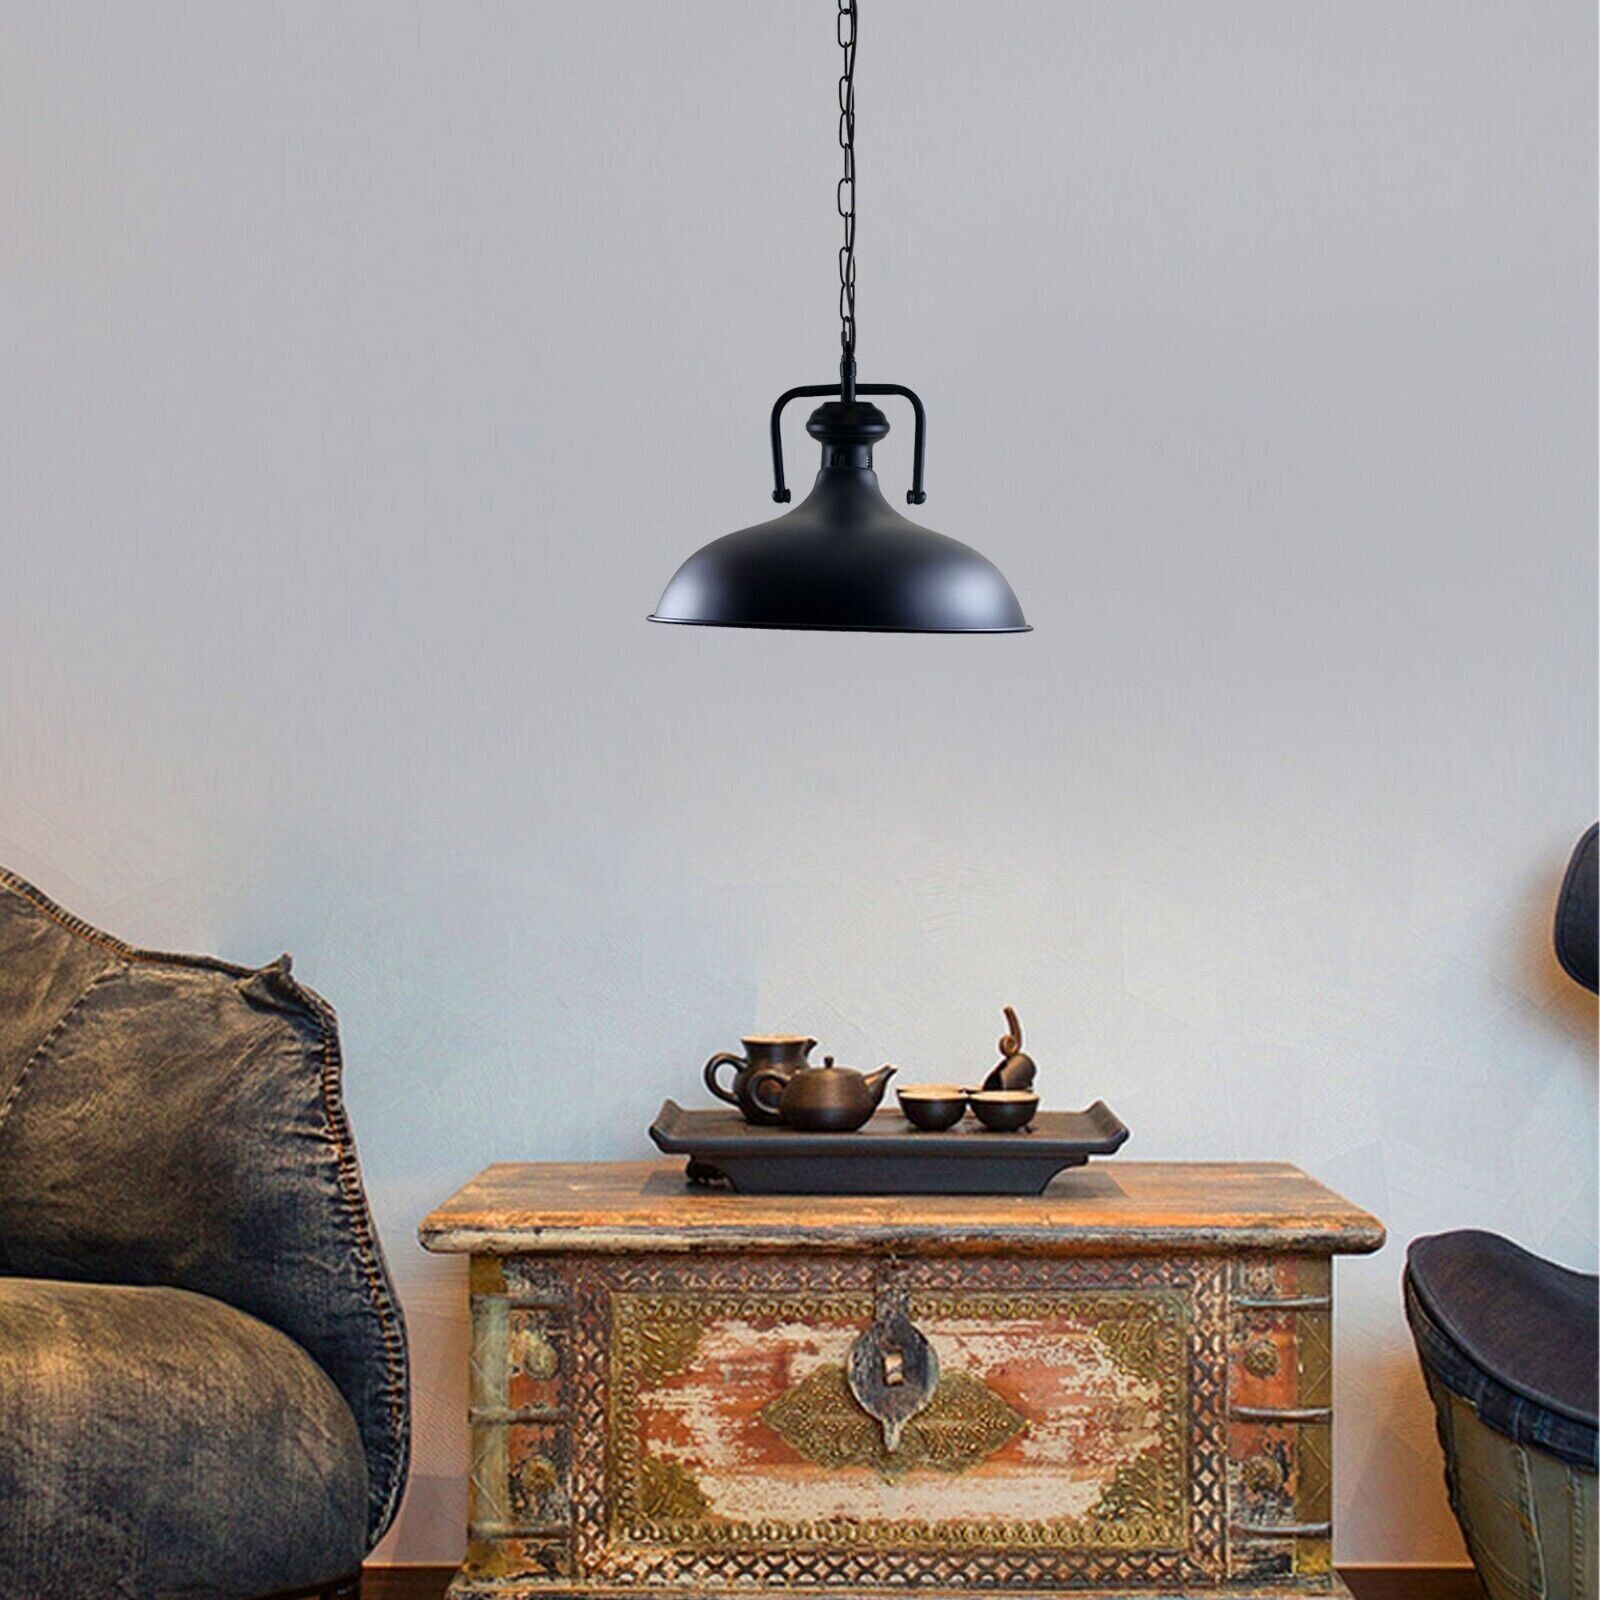 Black Pendant light  with chain for cafe.JPG